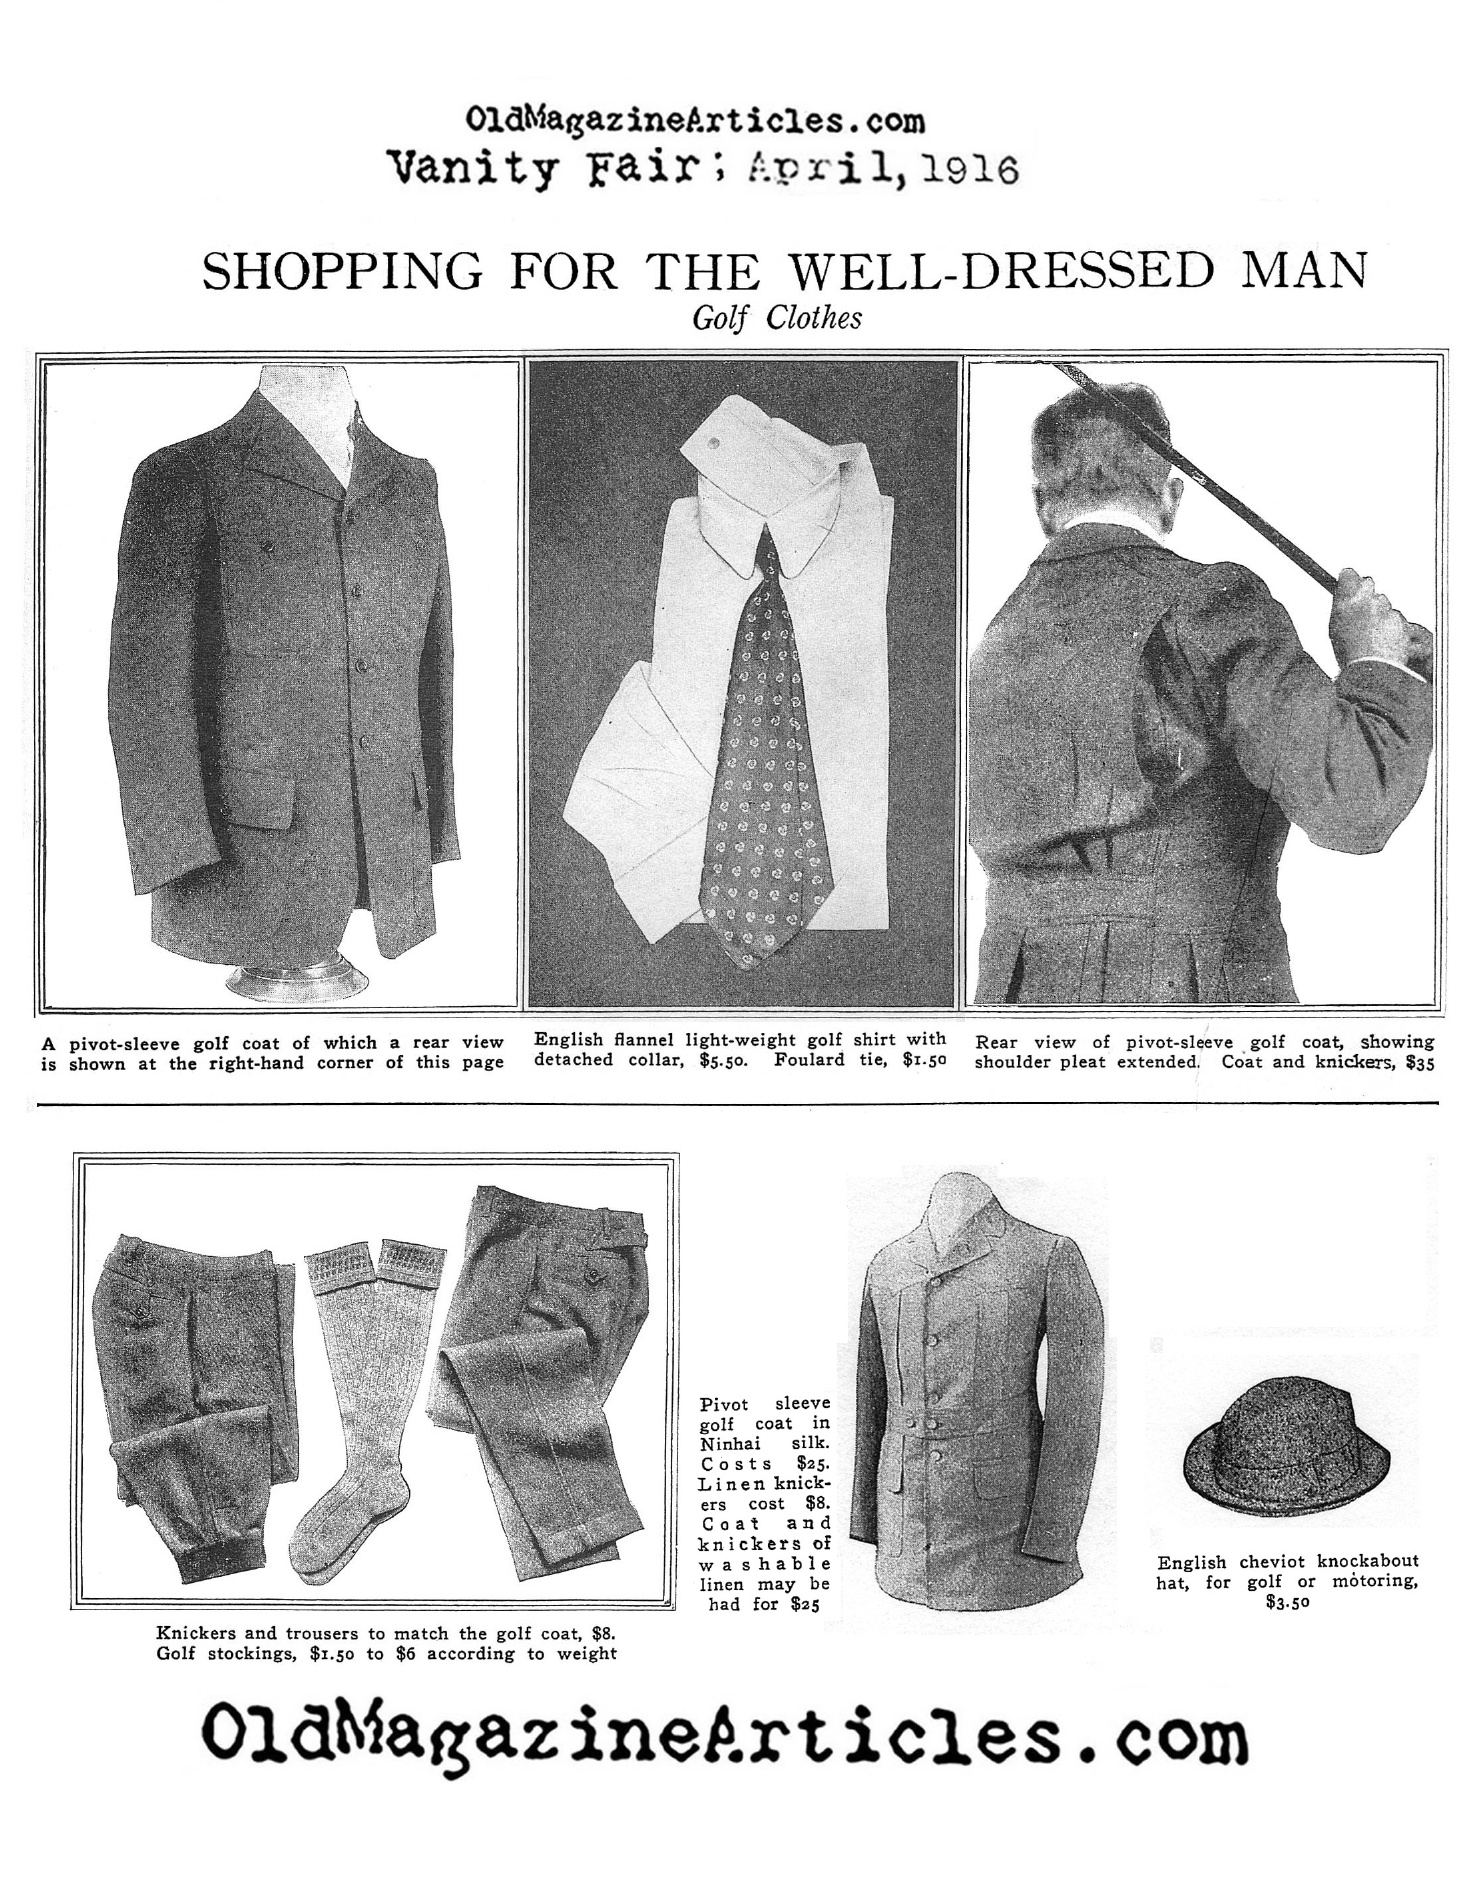 The Action-Back Jacket for the Golfing Man  (Vanity Fair Magazine, 1916)